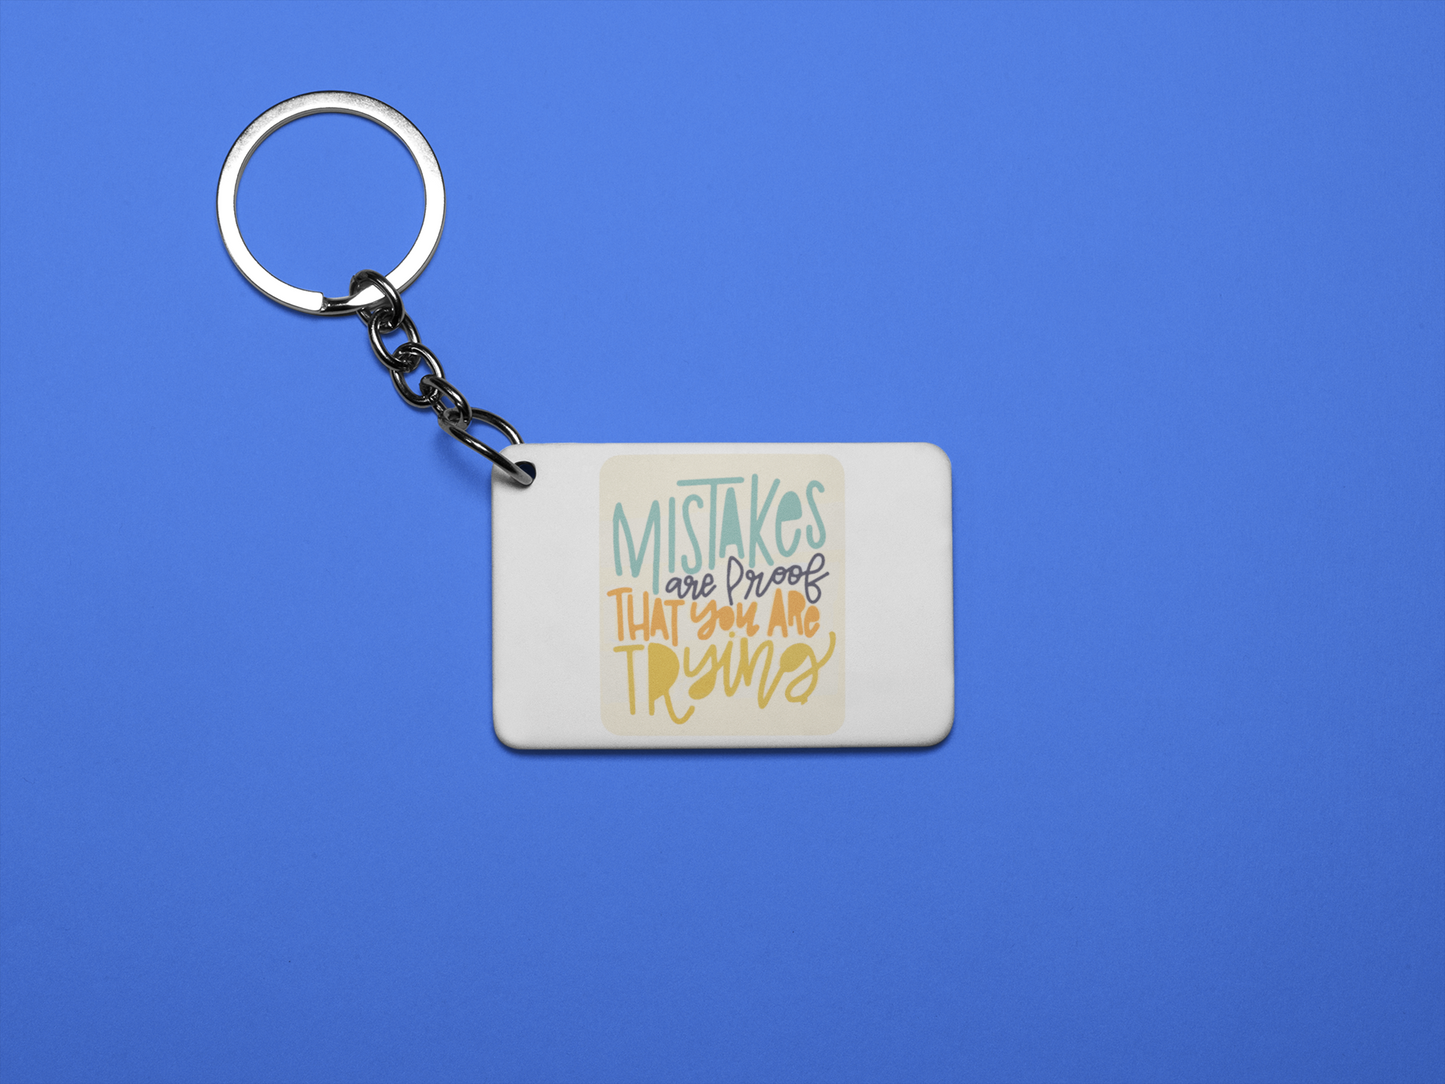 Mistakes are proof keychain